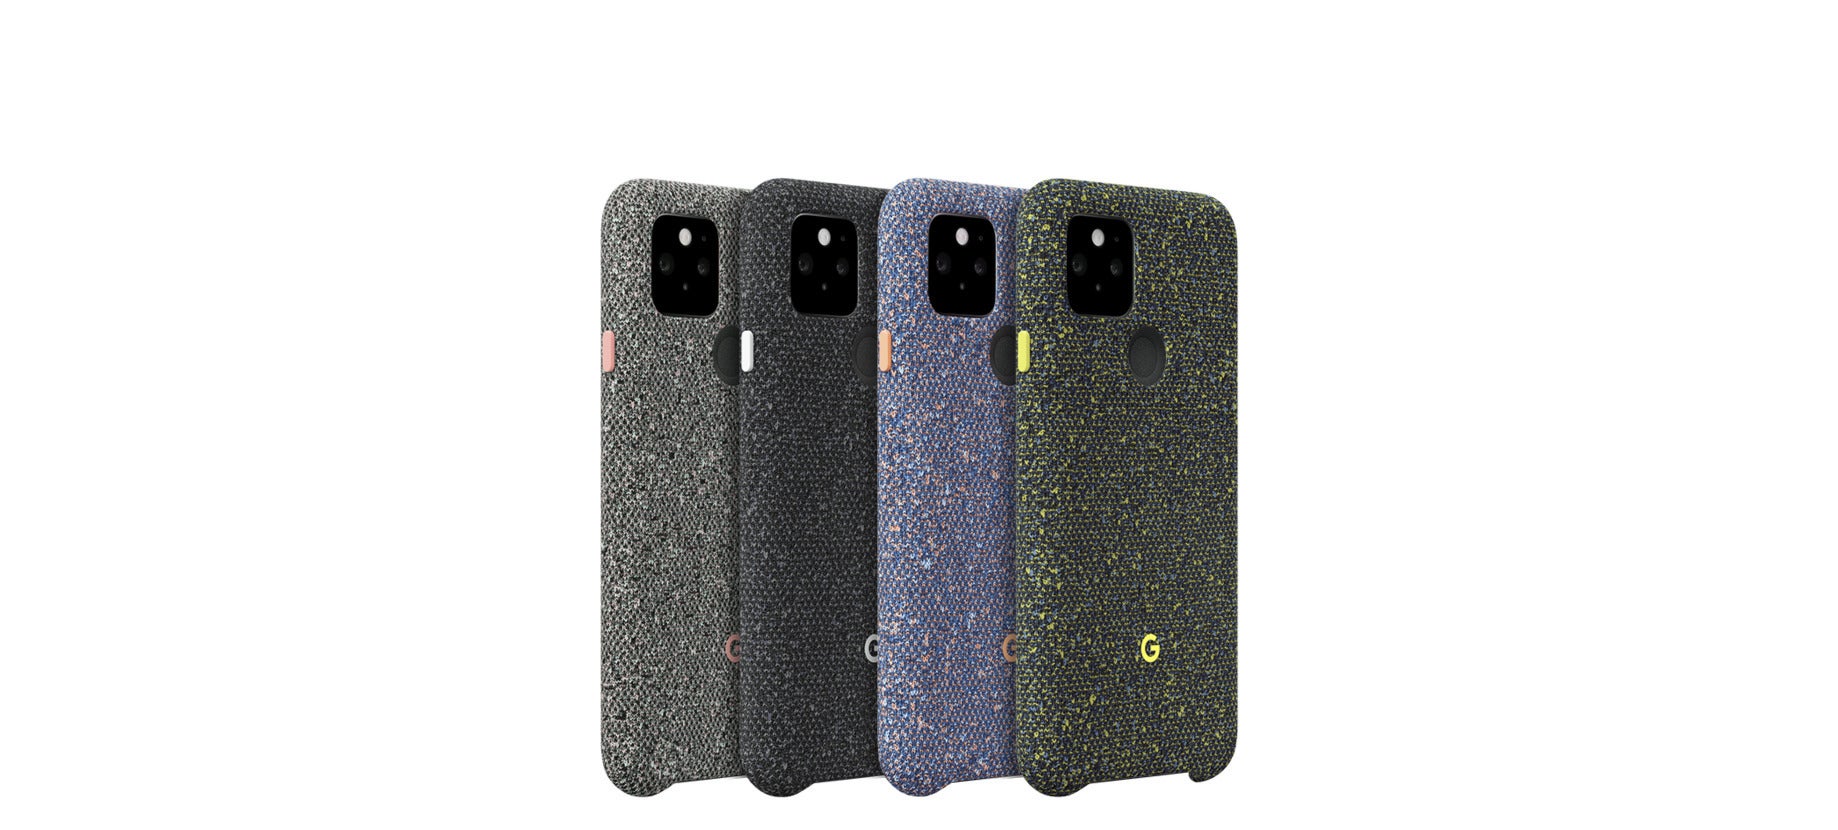 Pixel 5 Fabric Case - Here are the official Pixel 6 cases